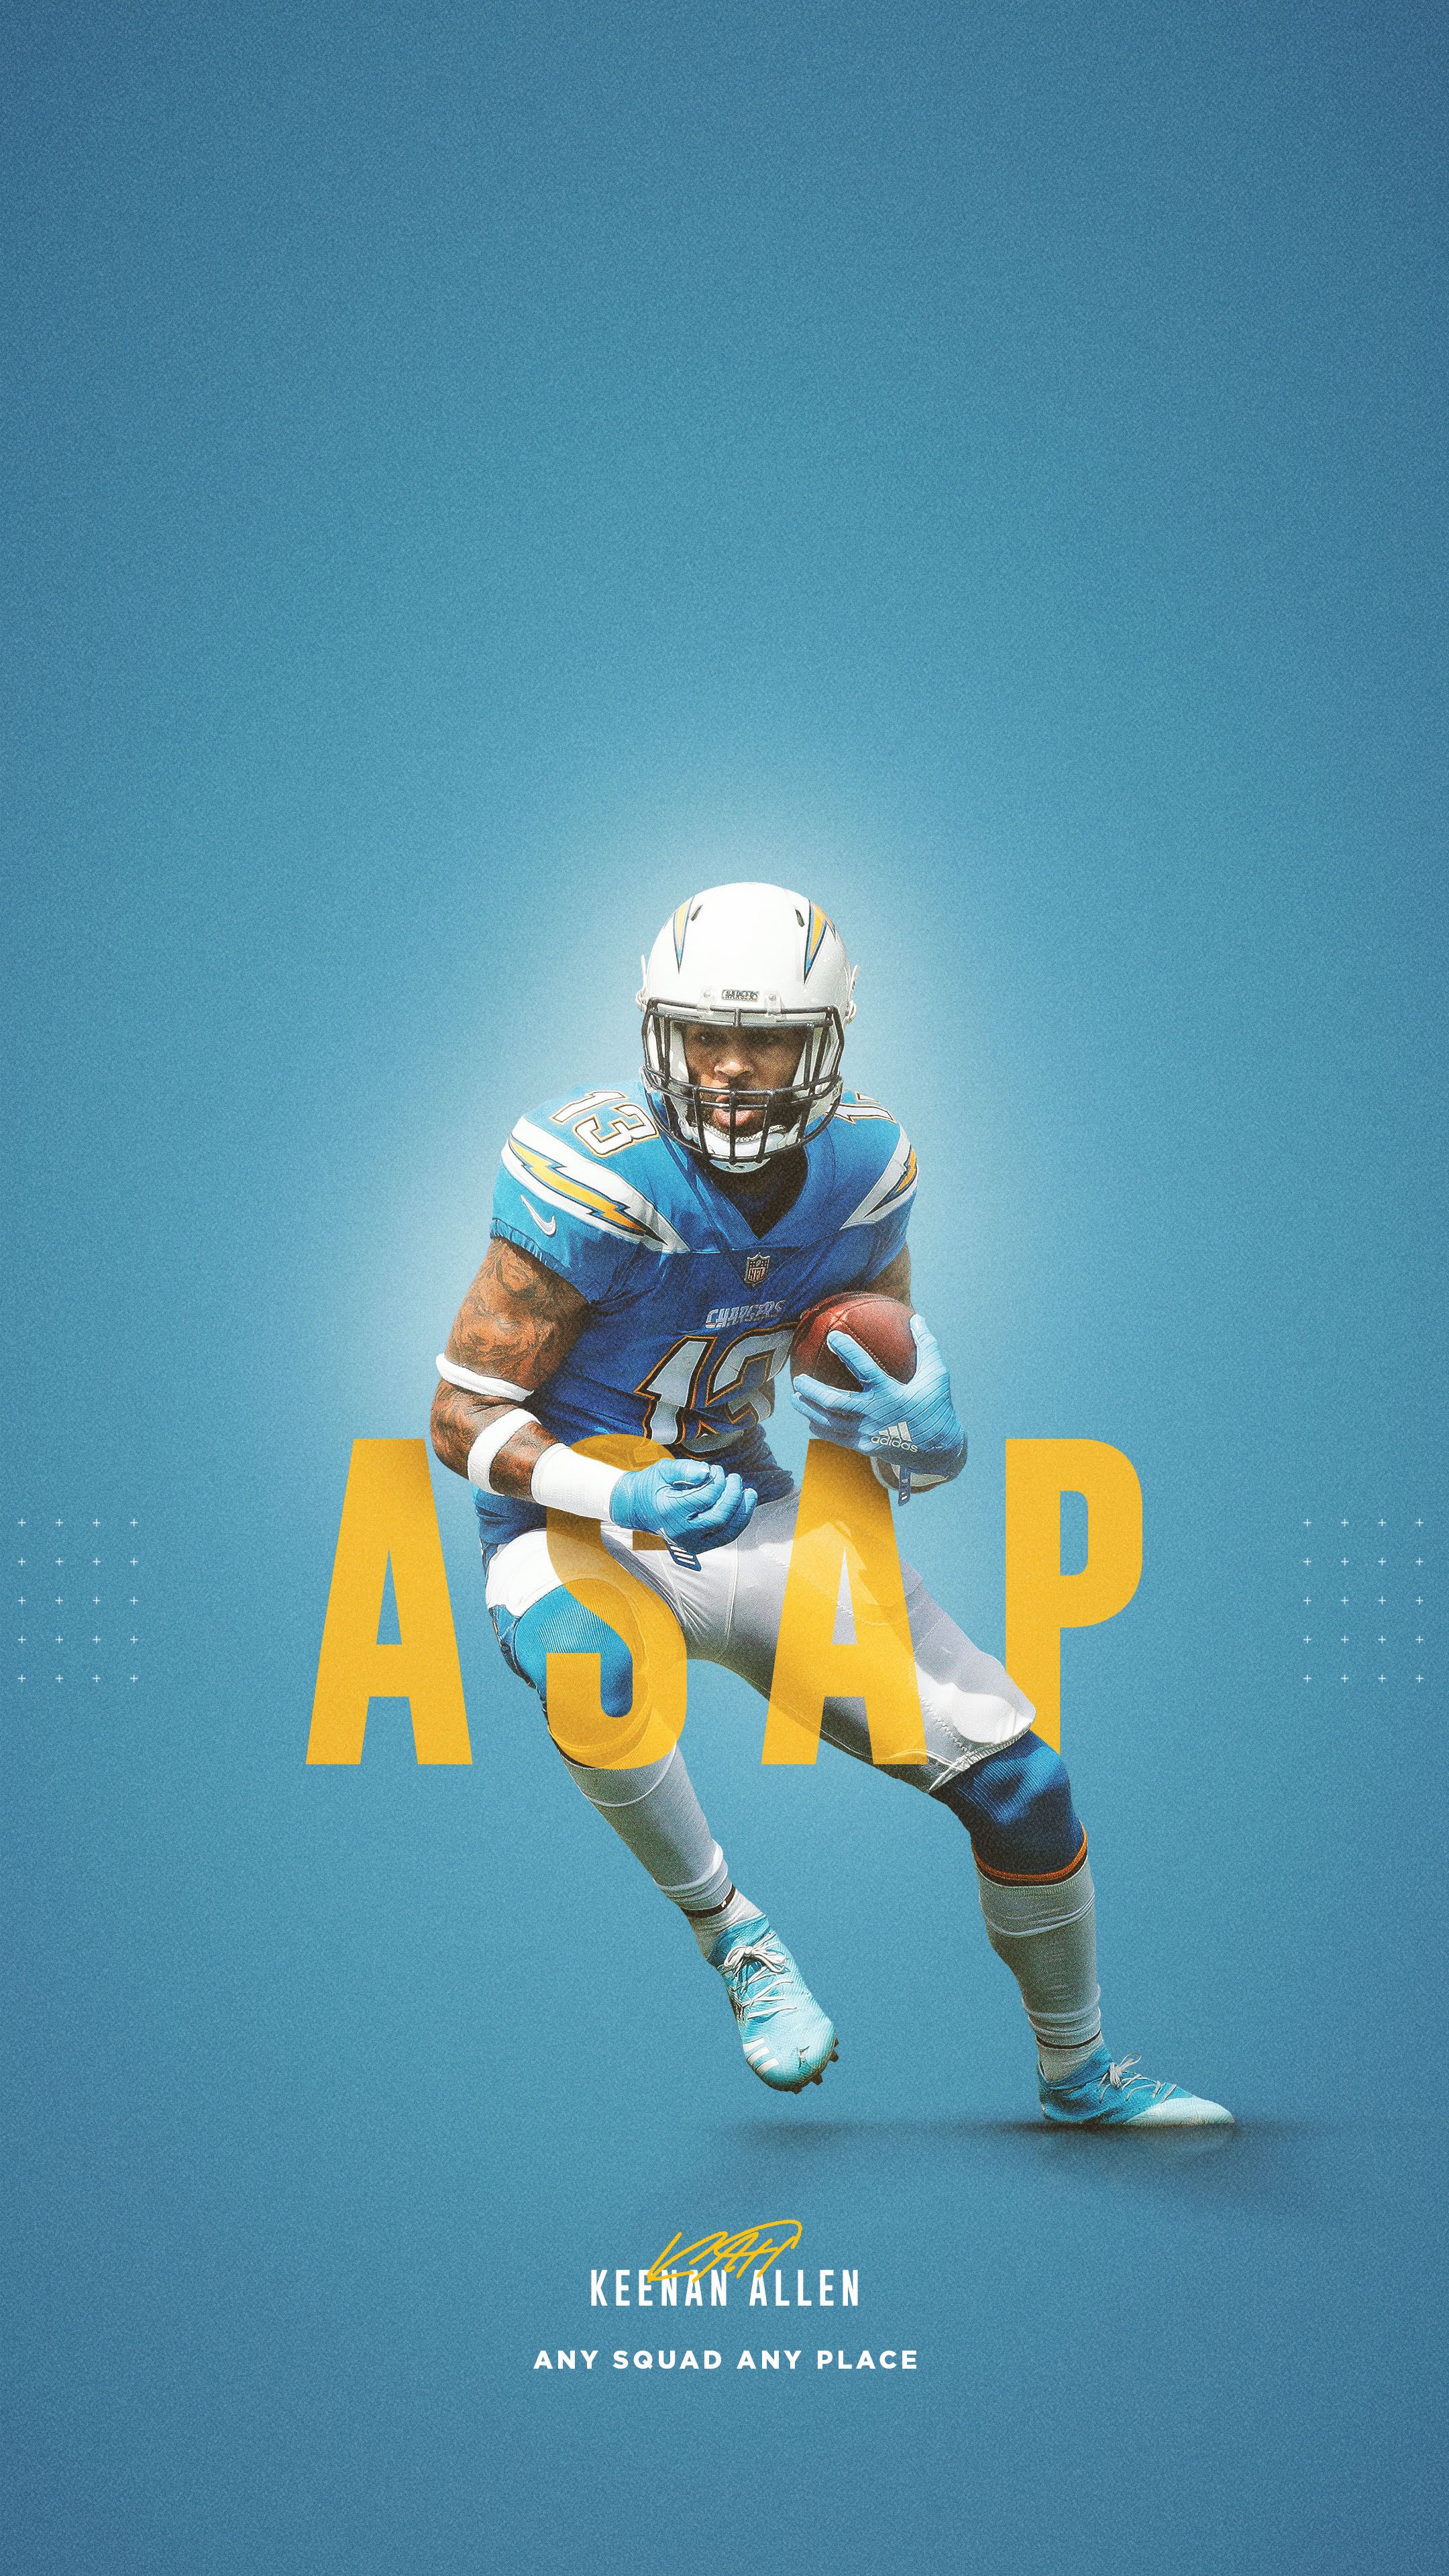 NFL Mobile Wallpapers Chargers on Behance